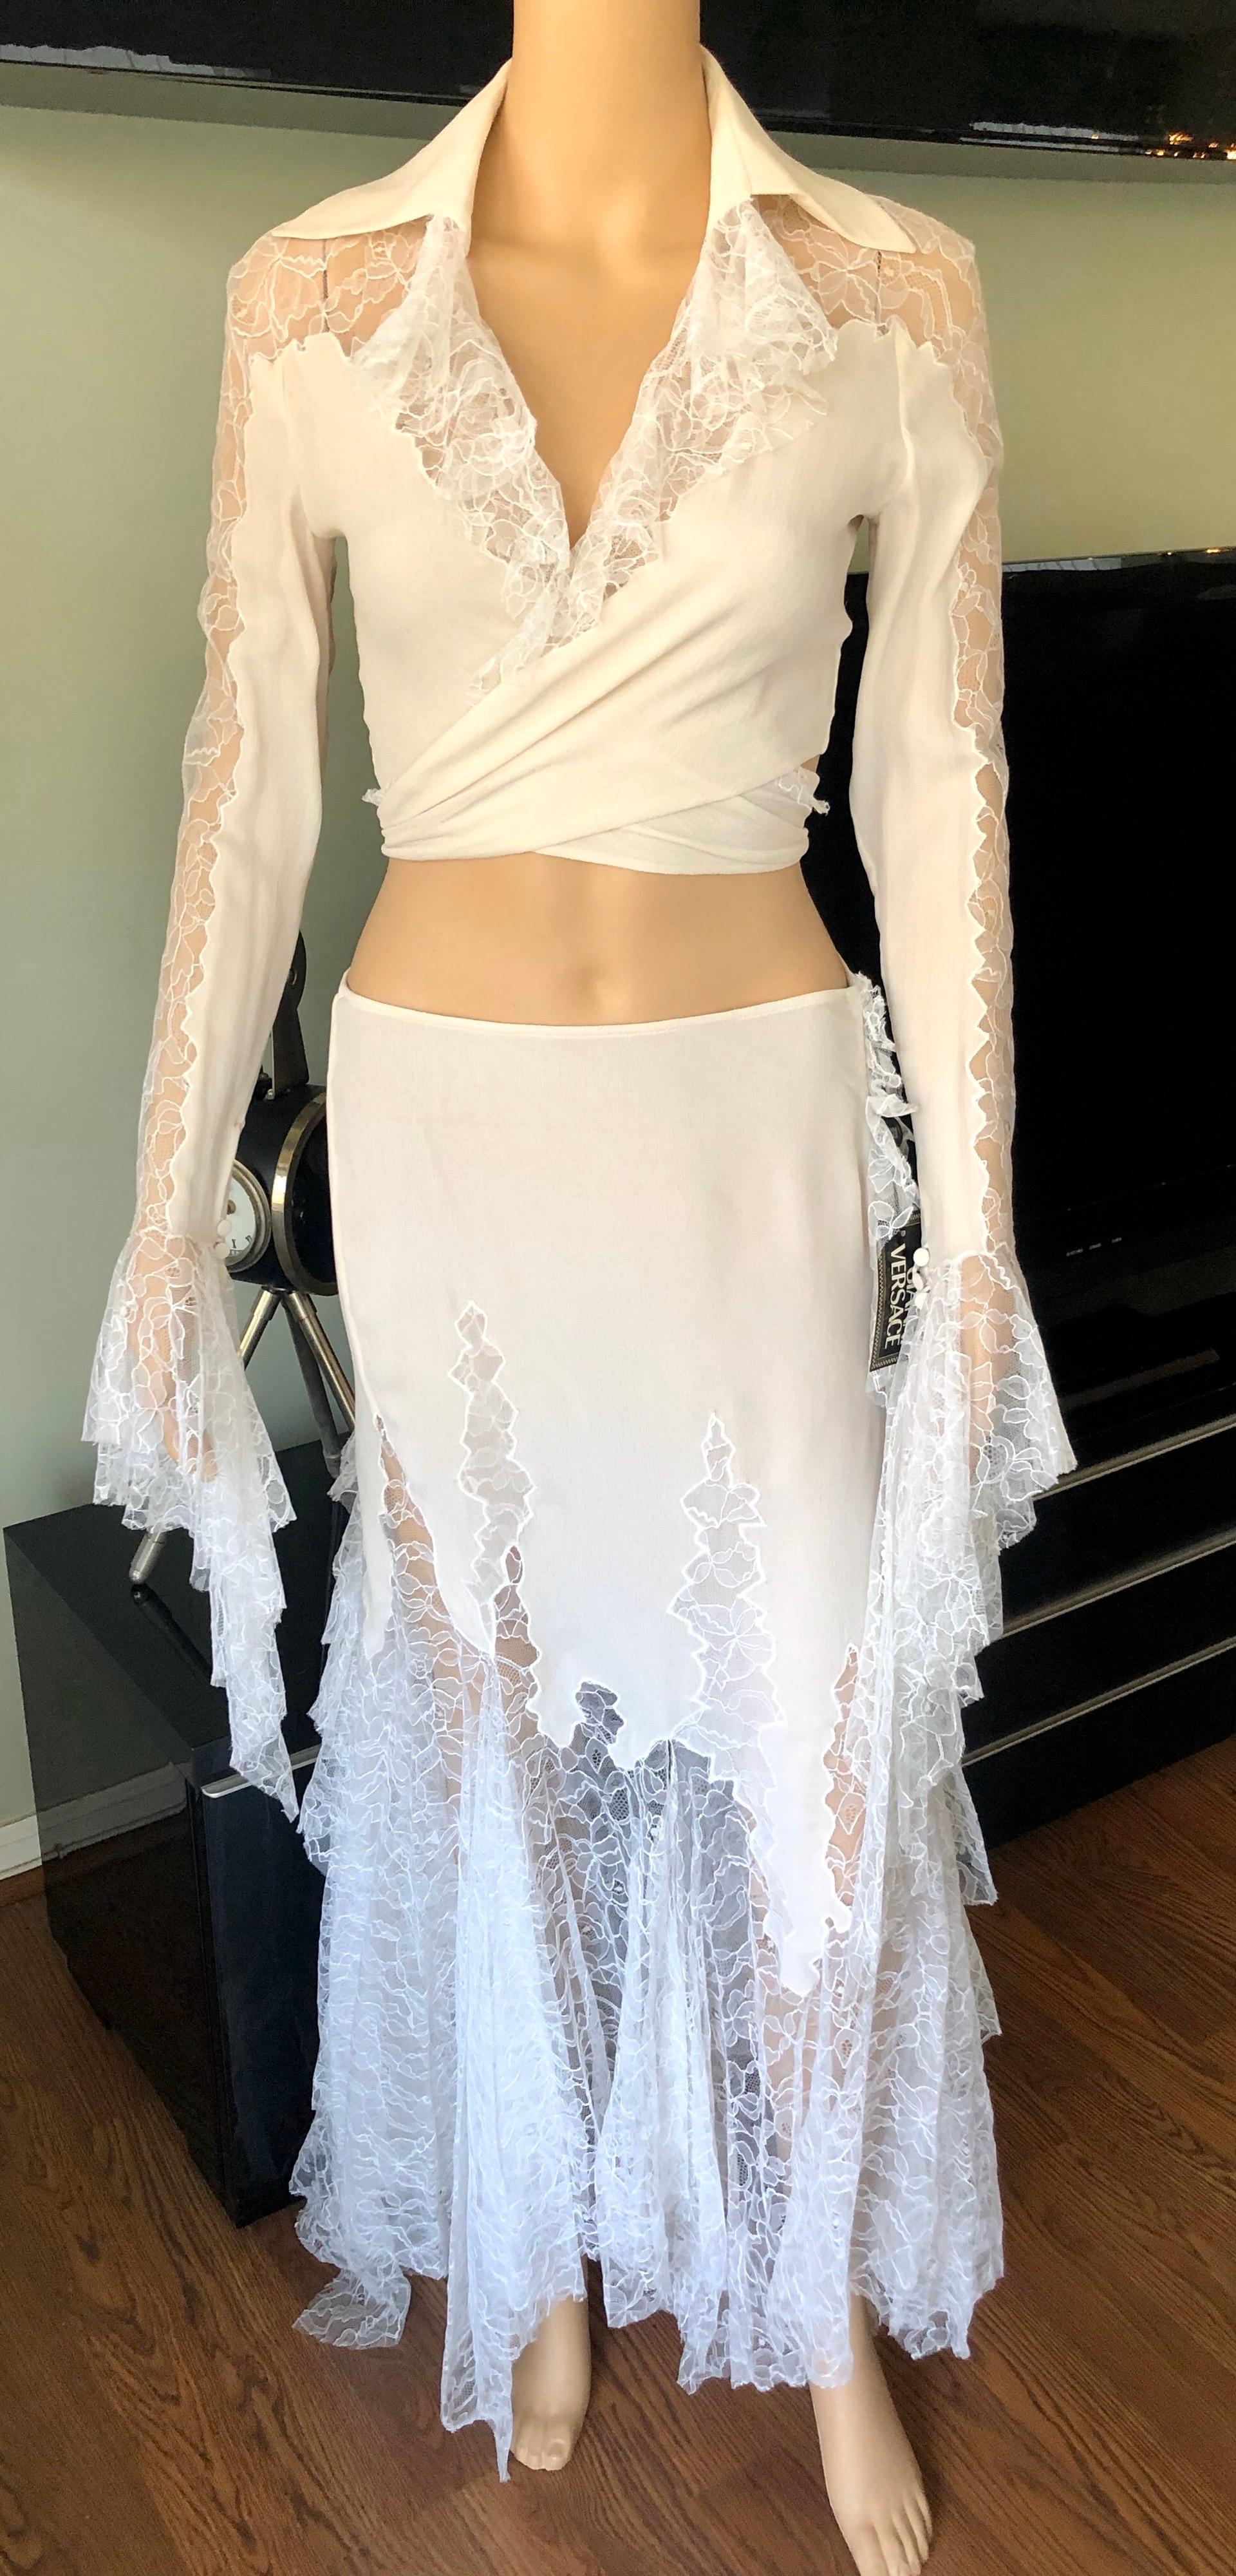 Gianni Versace Vintage Unworn Sheer Lace Panels Silk Ivory Top and Skirt 2 Piece Set  IT 40

Gianni Versace silk skirt set with sheer lace panels and trim throughout, top features pointed collars, long sleeves and sash-tie closure. Skirt features